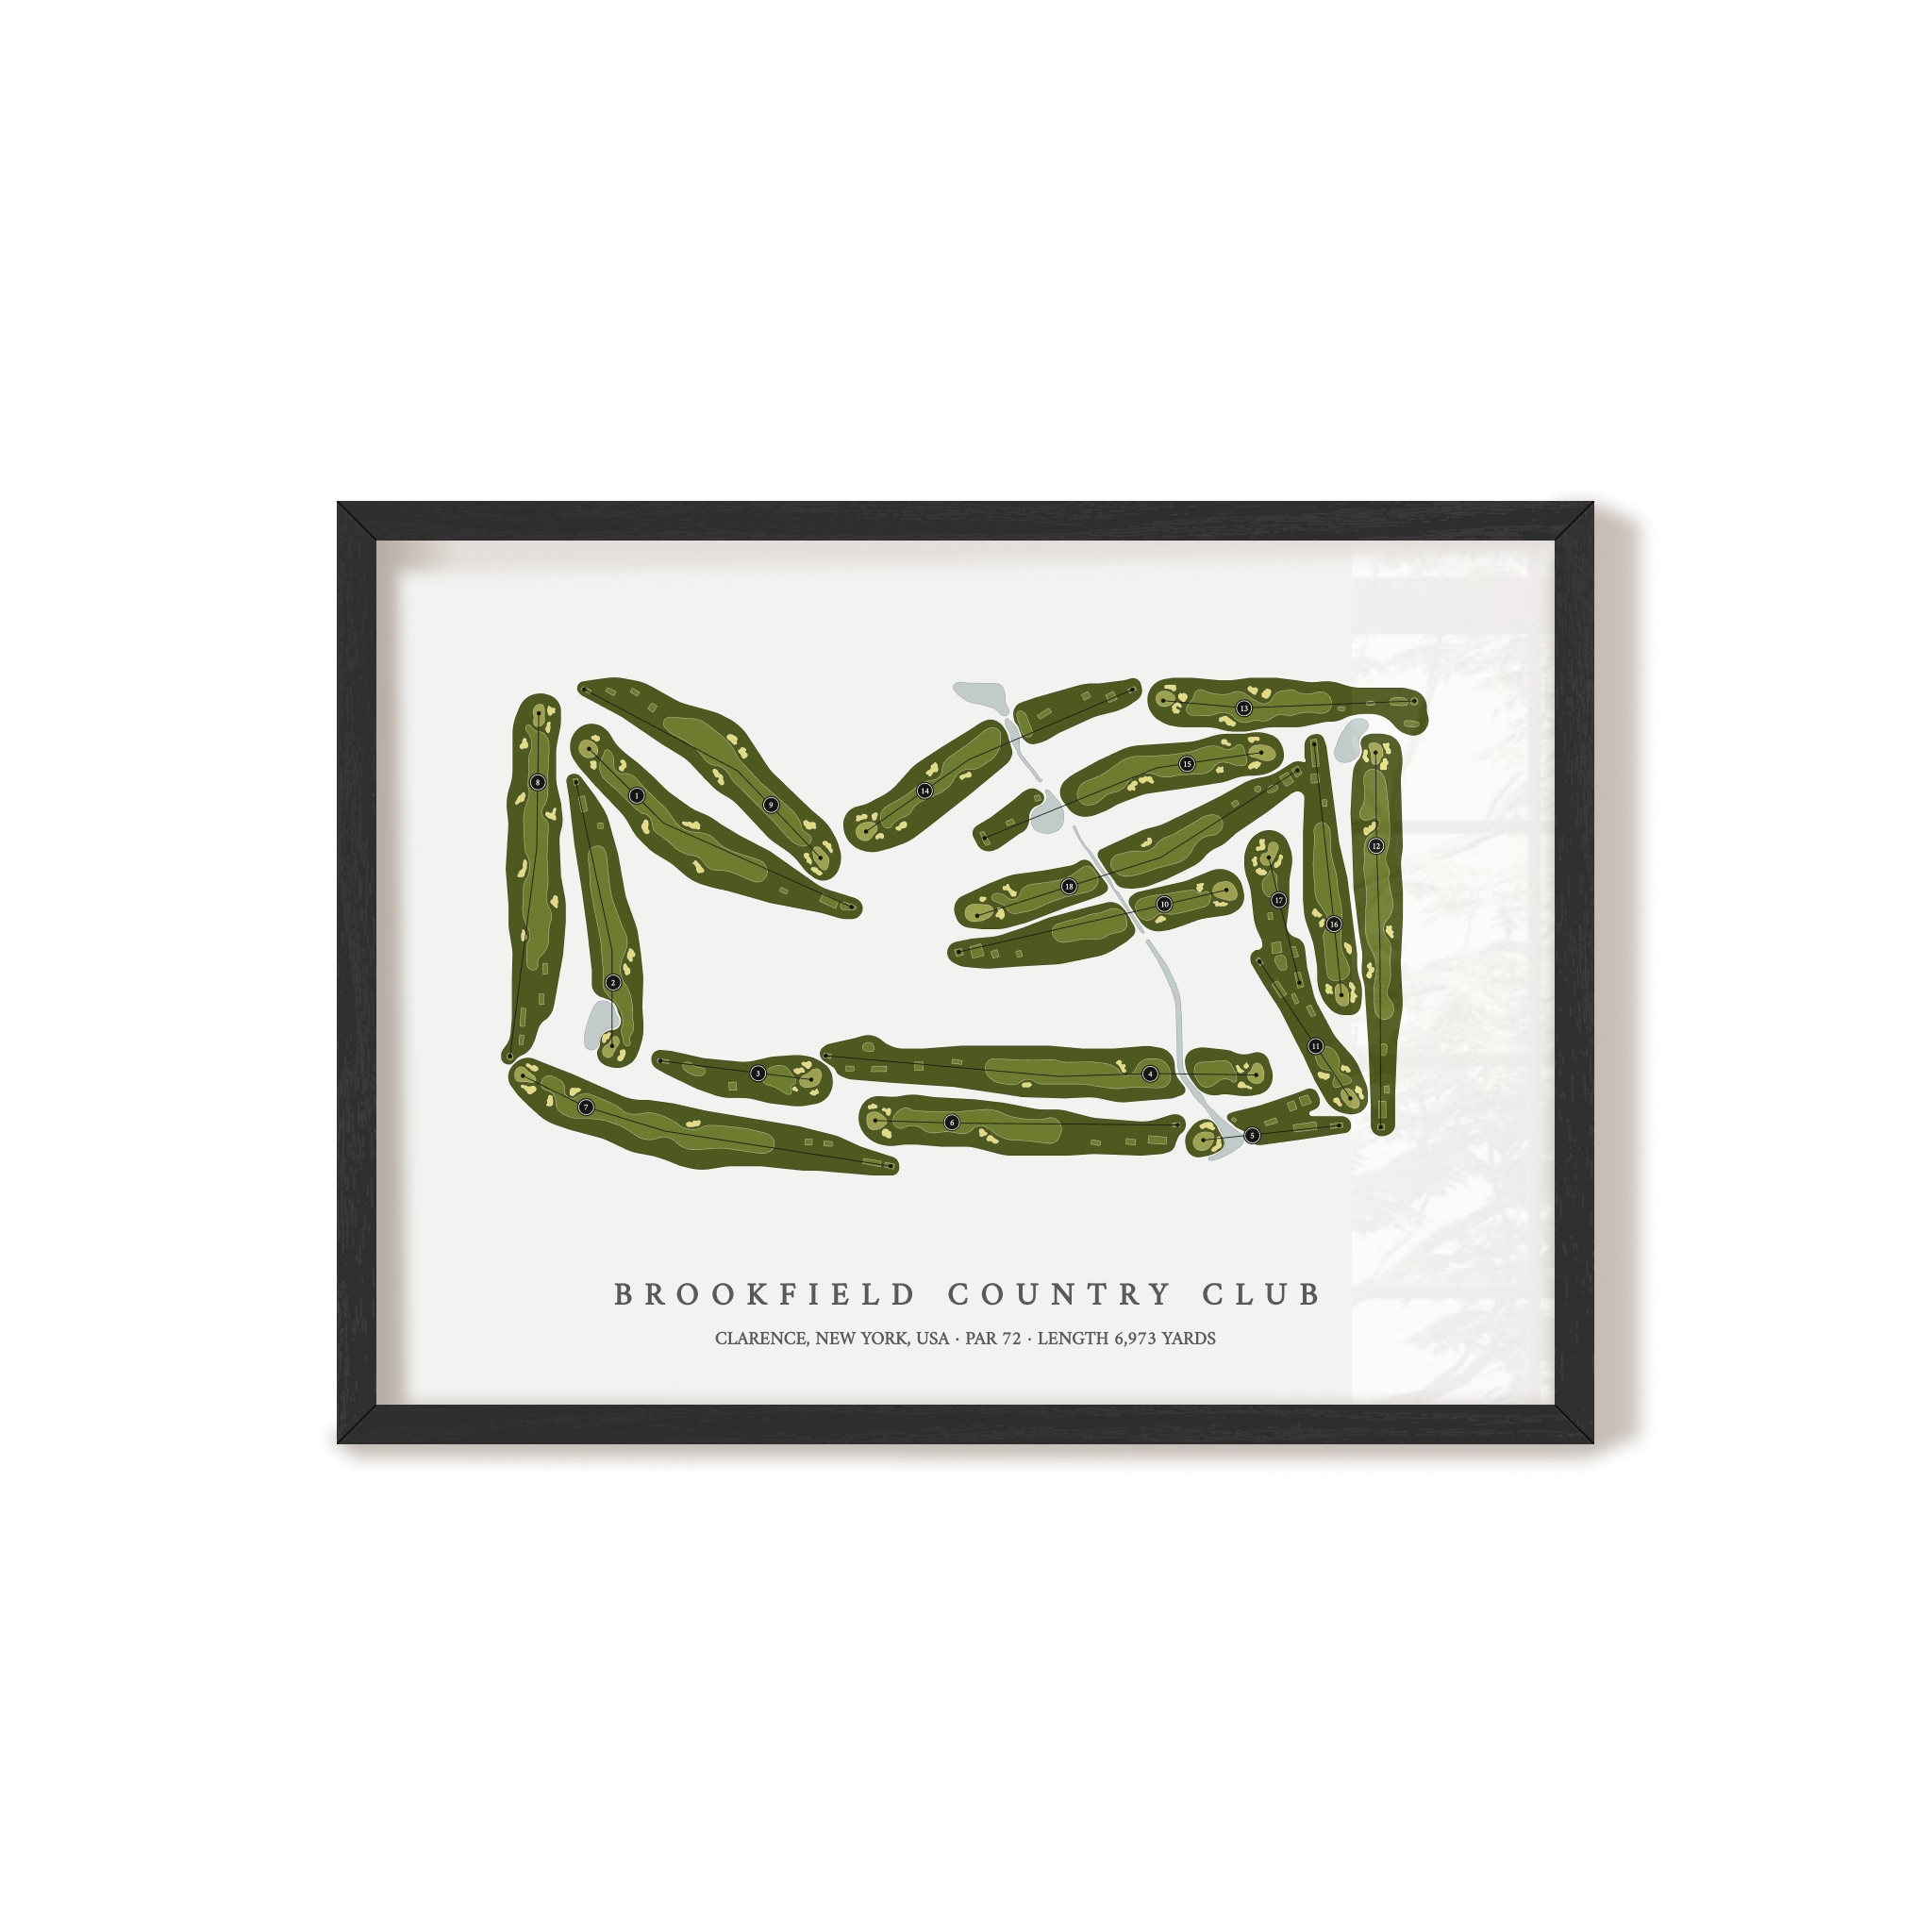 Brookfield Country Club | Golf Course Print | Black Frame 